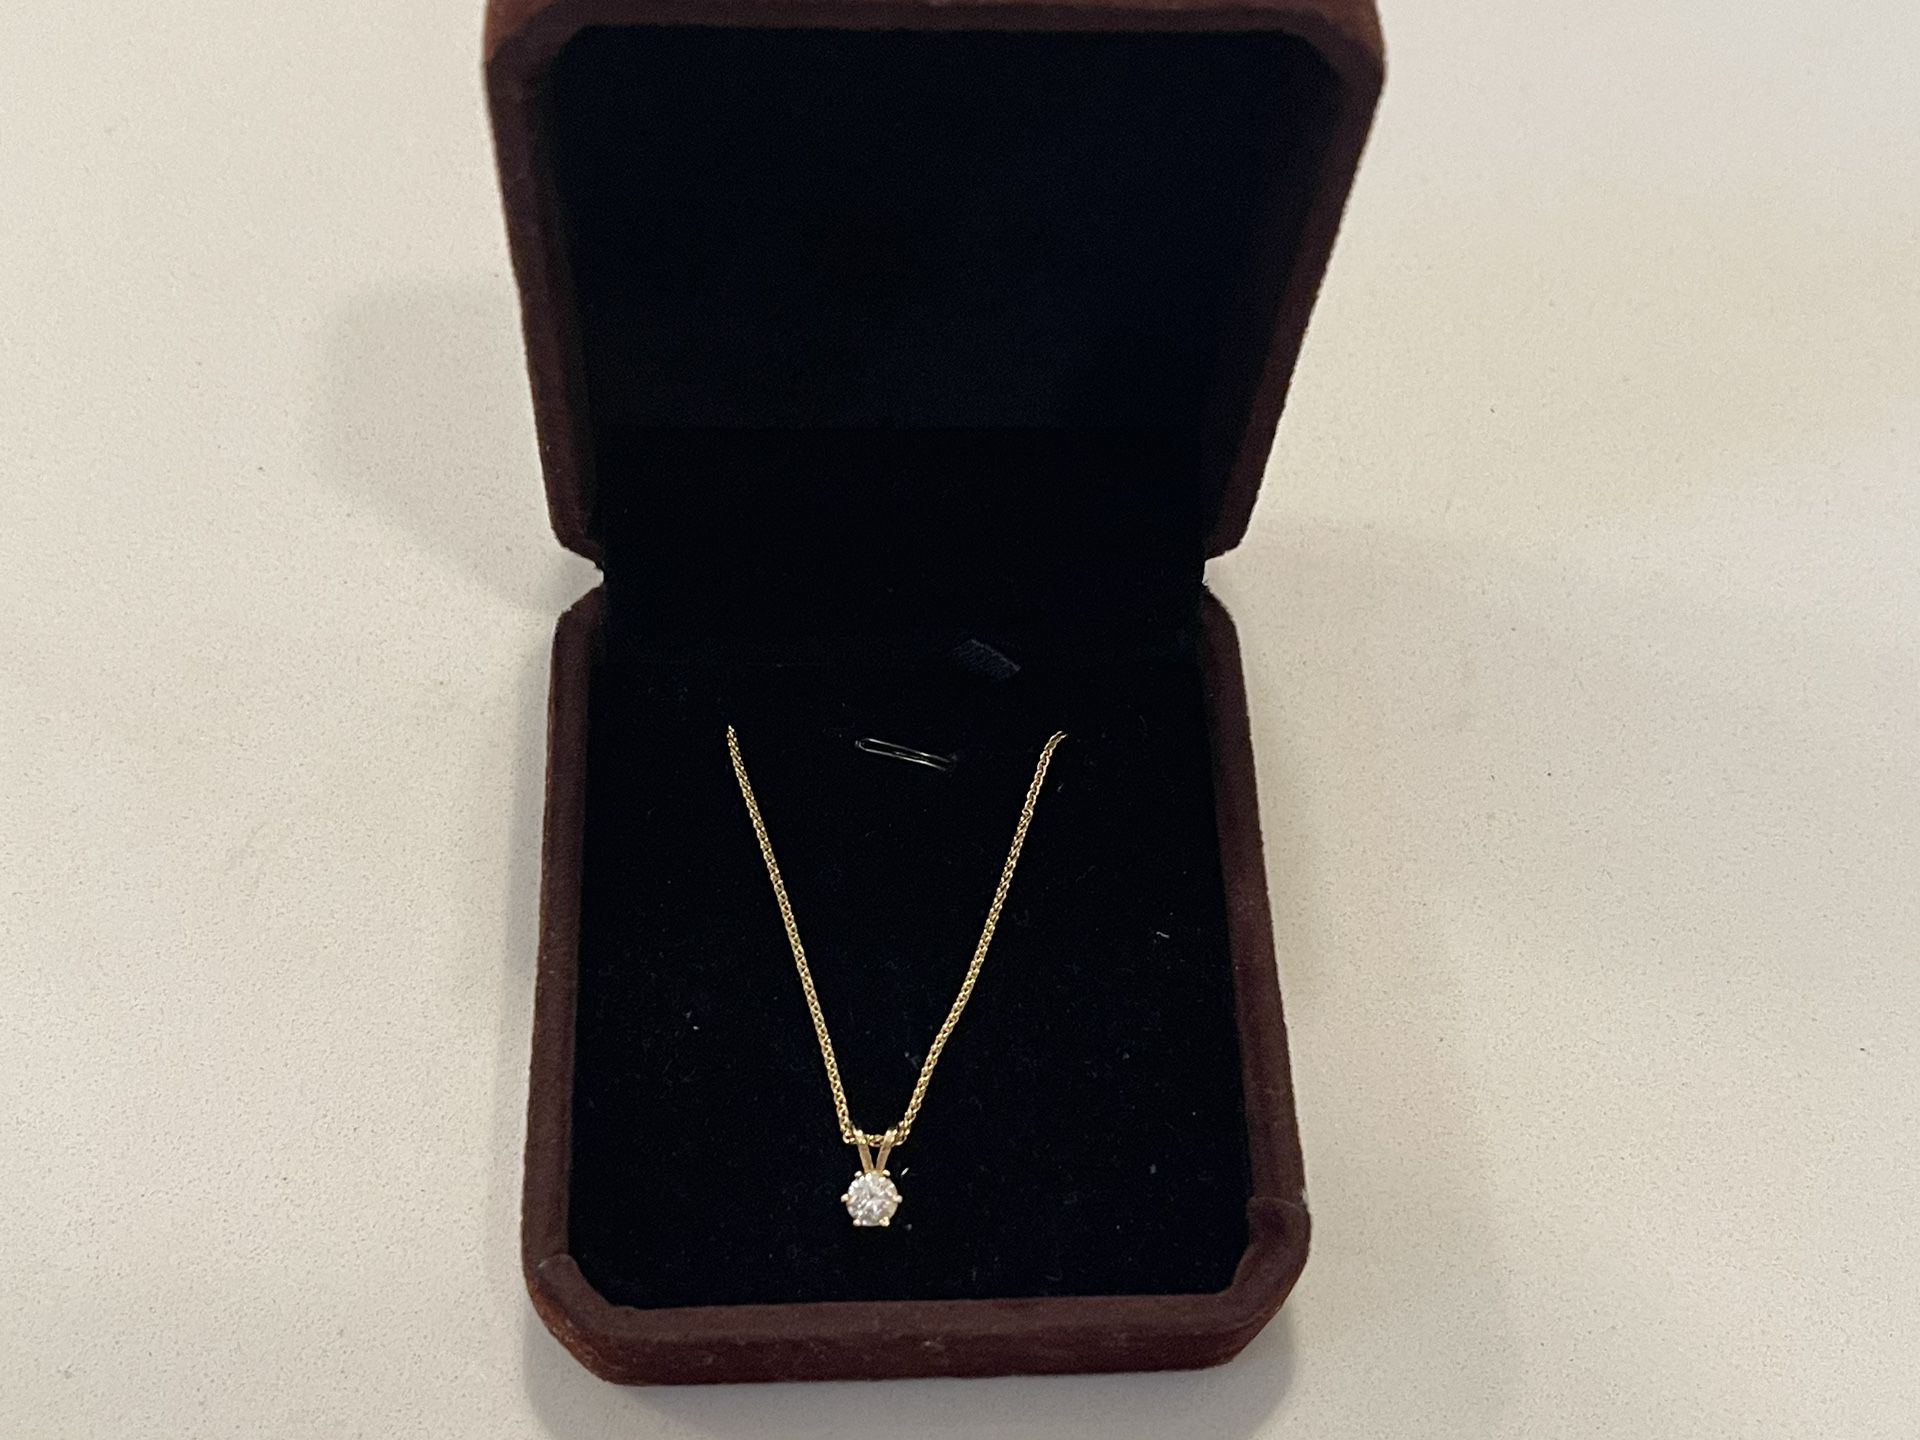 Dainty 10kt Gold Chain With .55ct Colorless Diamond Solitaire Pendant Set In 14kt Gold